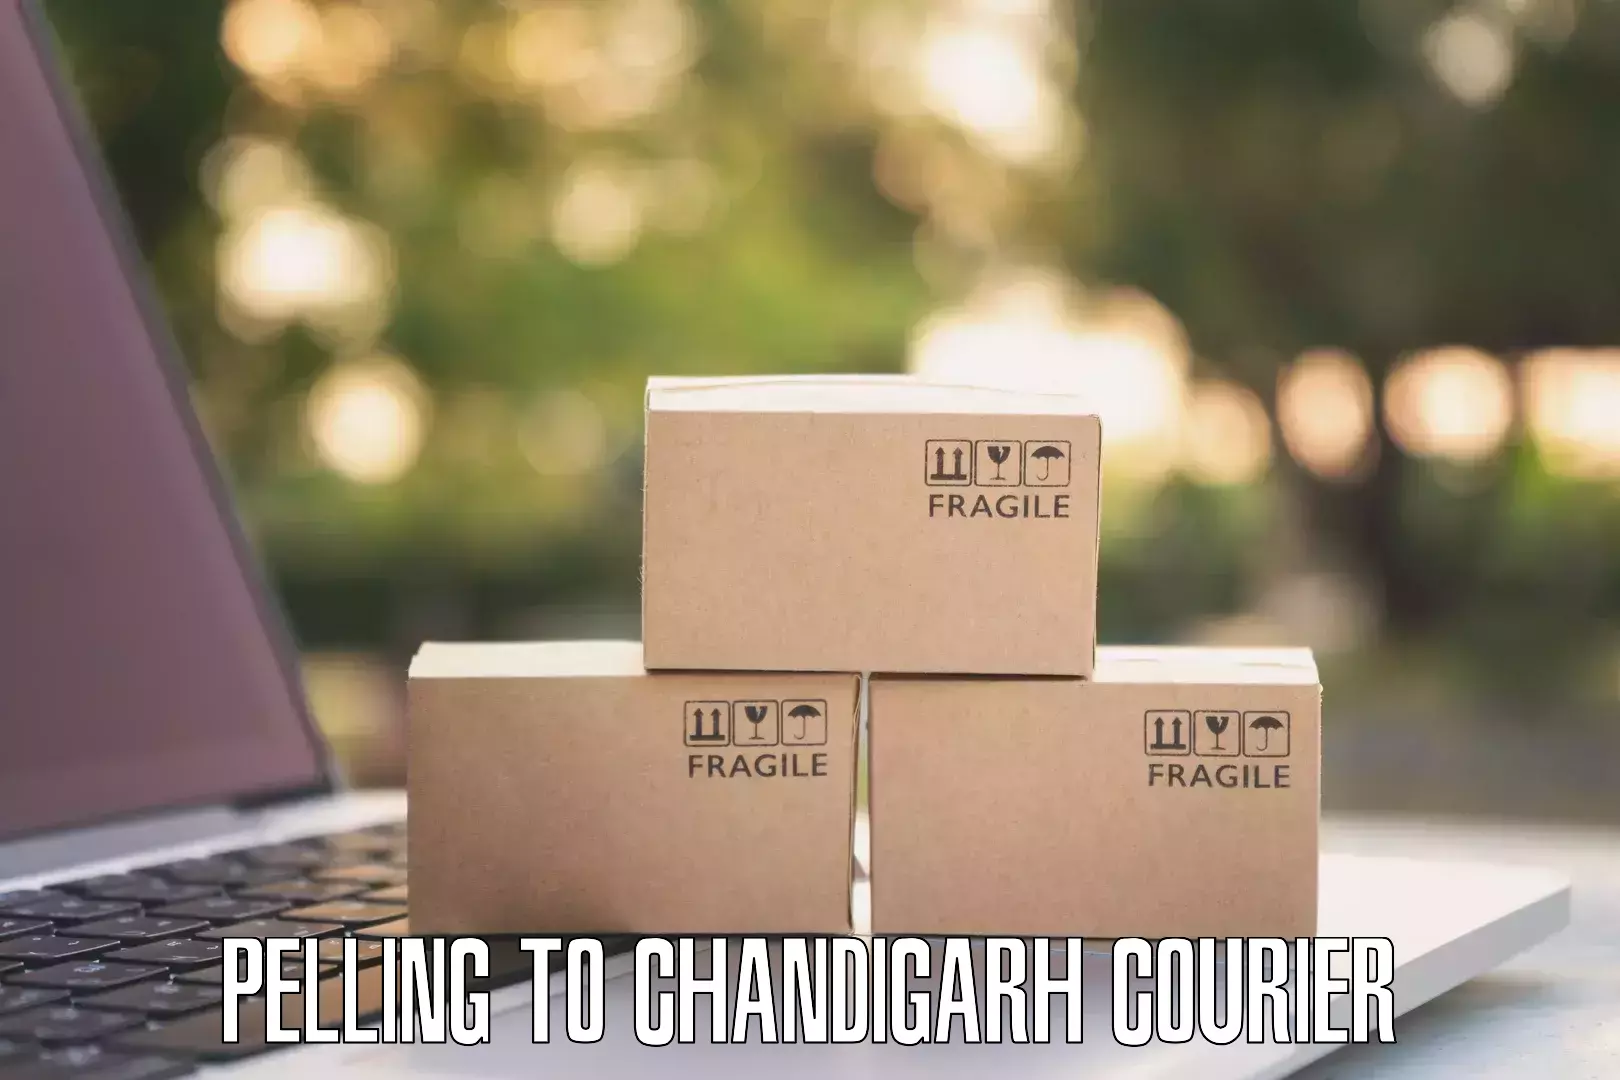 Cash on delivery service Pelling to Chandigarh